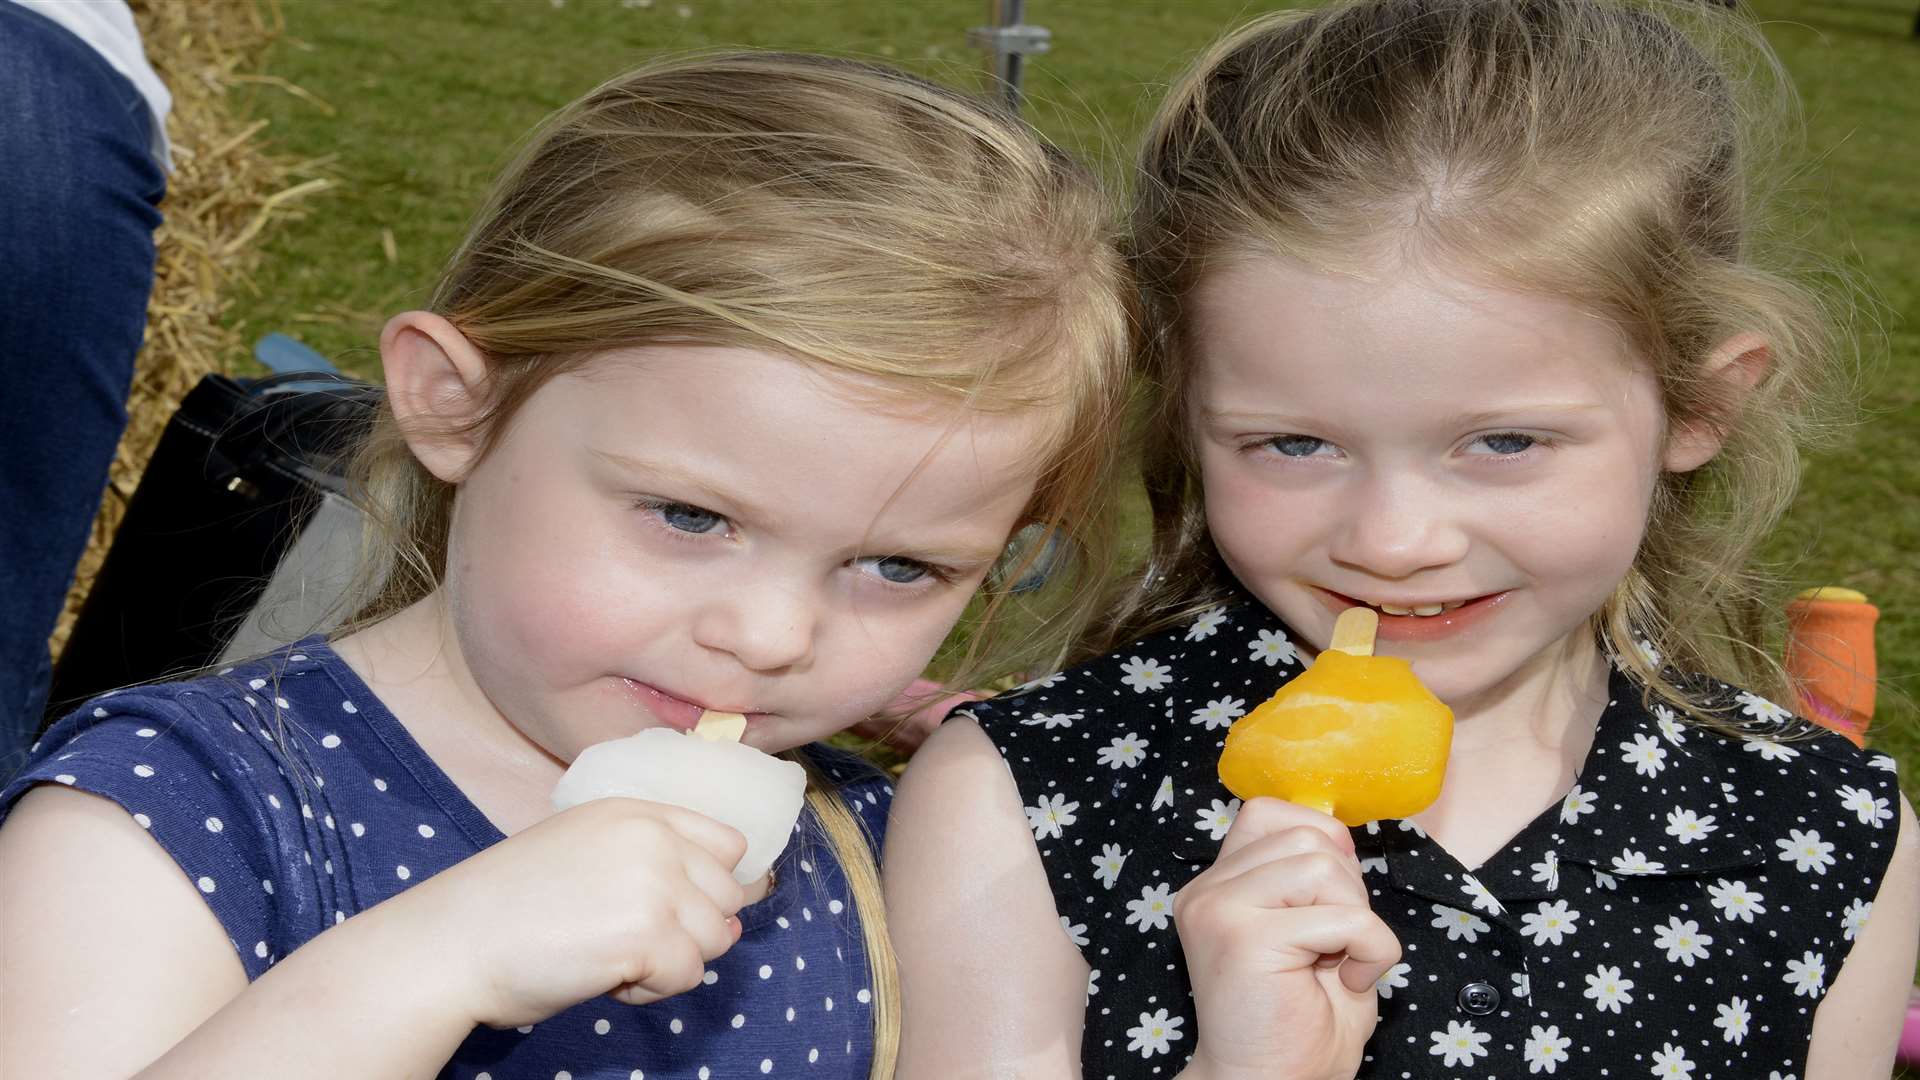 Cooling down with ice lollies - sisters Evie and Imogen Waller. Picture: Paul Amos